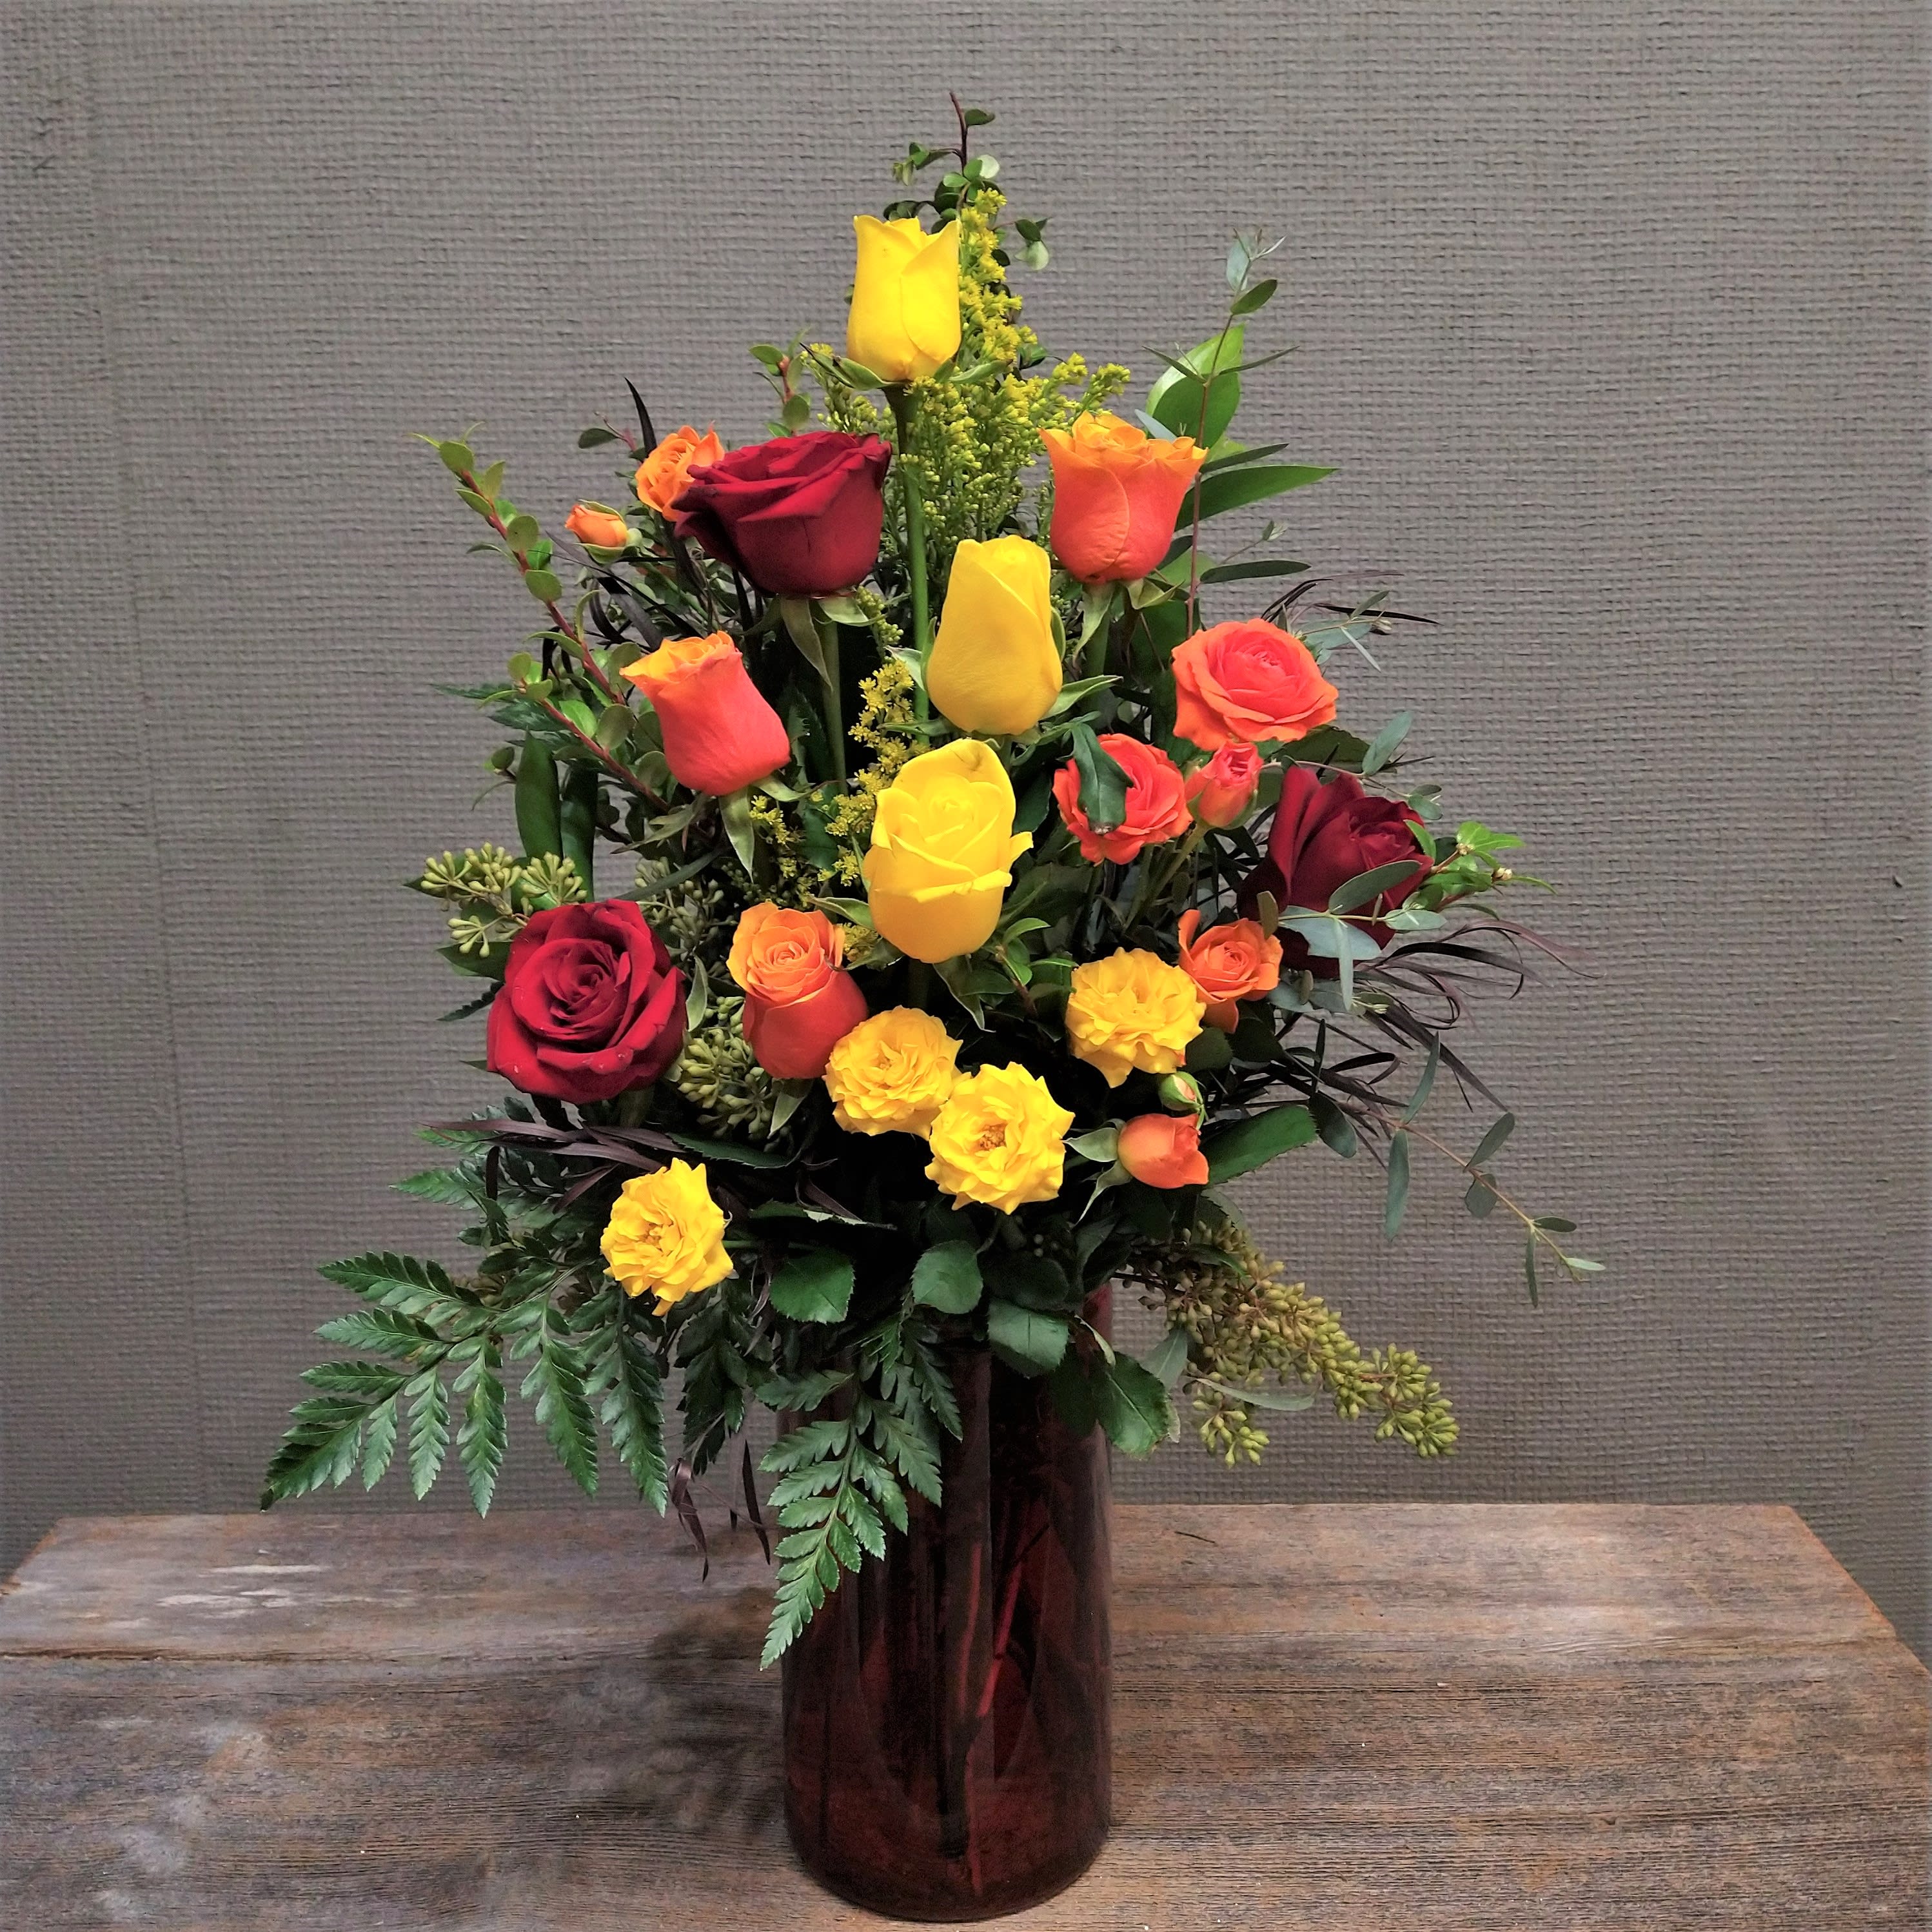 Eternal Flame - For the red hot romance. 9 full size roses and 3 spray roses create our flame of love.